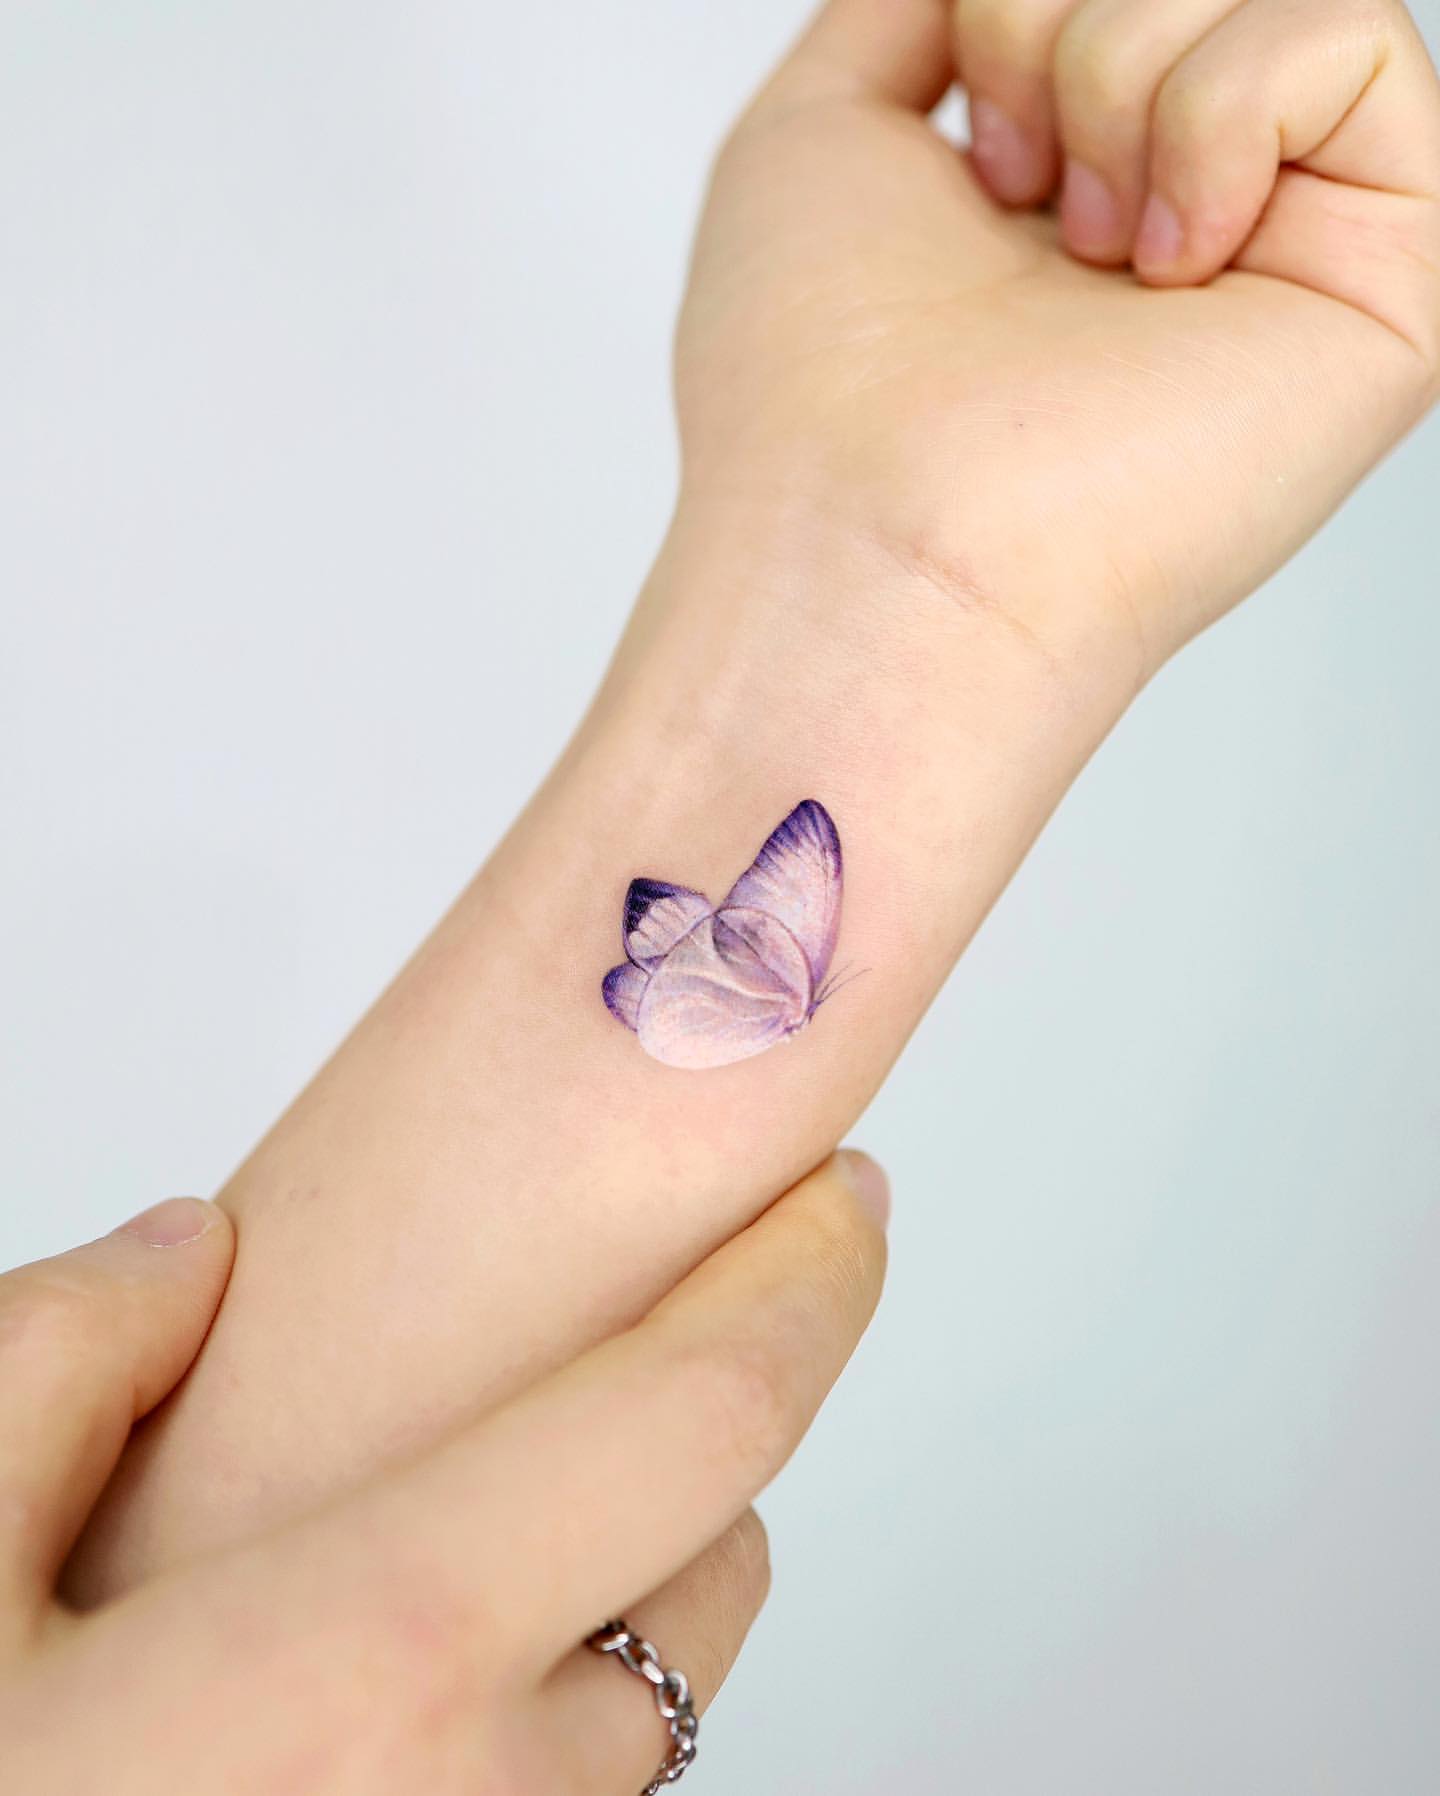 Small Tattoos for Women 65